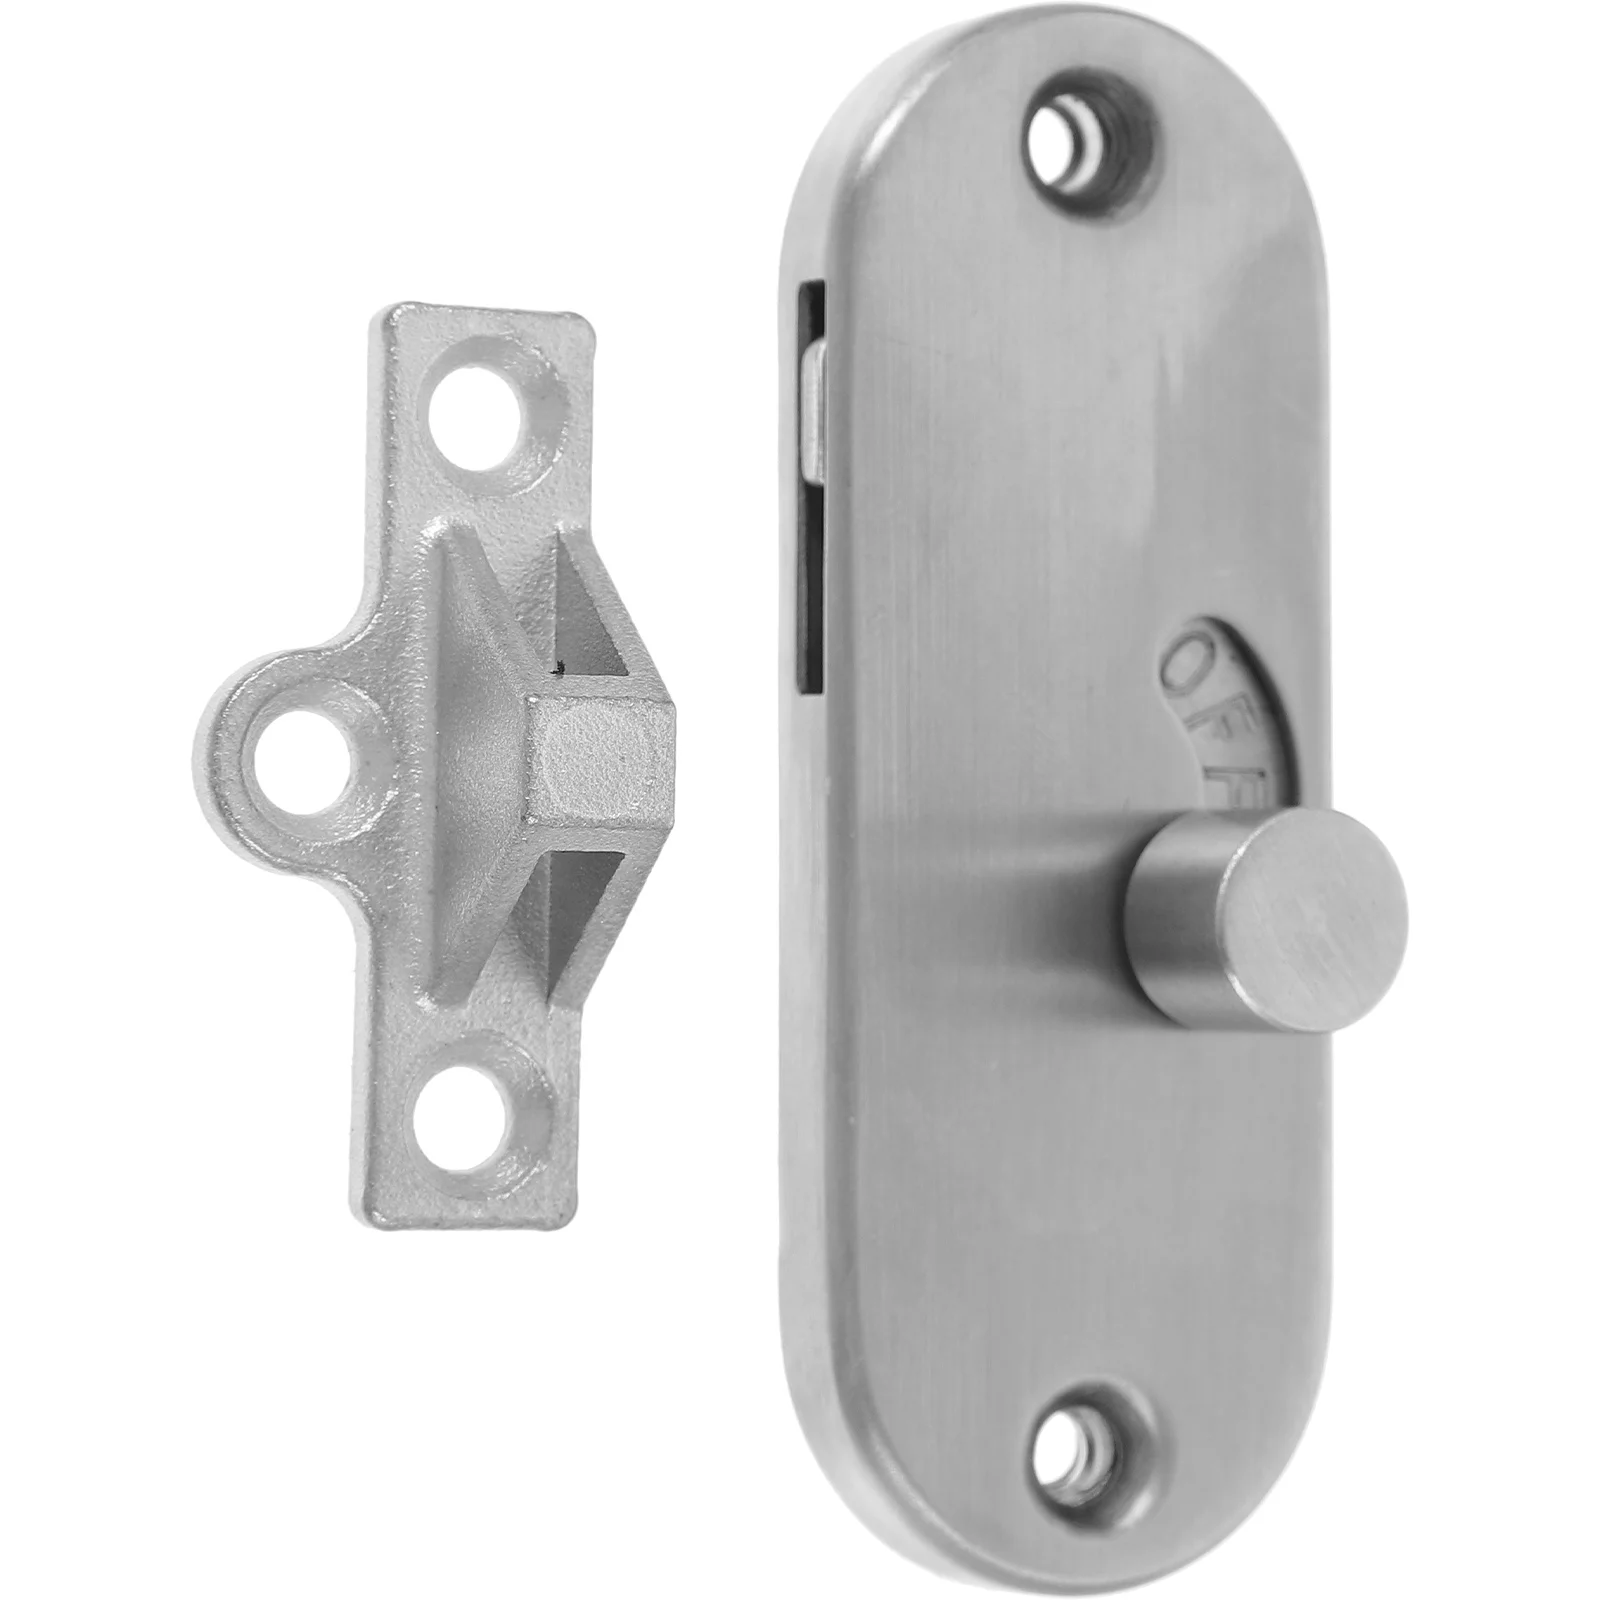 

Sliding Door Gate Latch Wooden Fence Barn Latches Locks Bathroom Bolt Hook Hasp Stainless Steel 90 Degree Outswing Doors